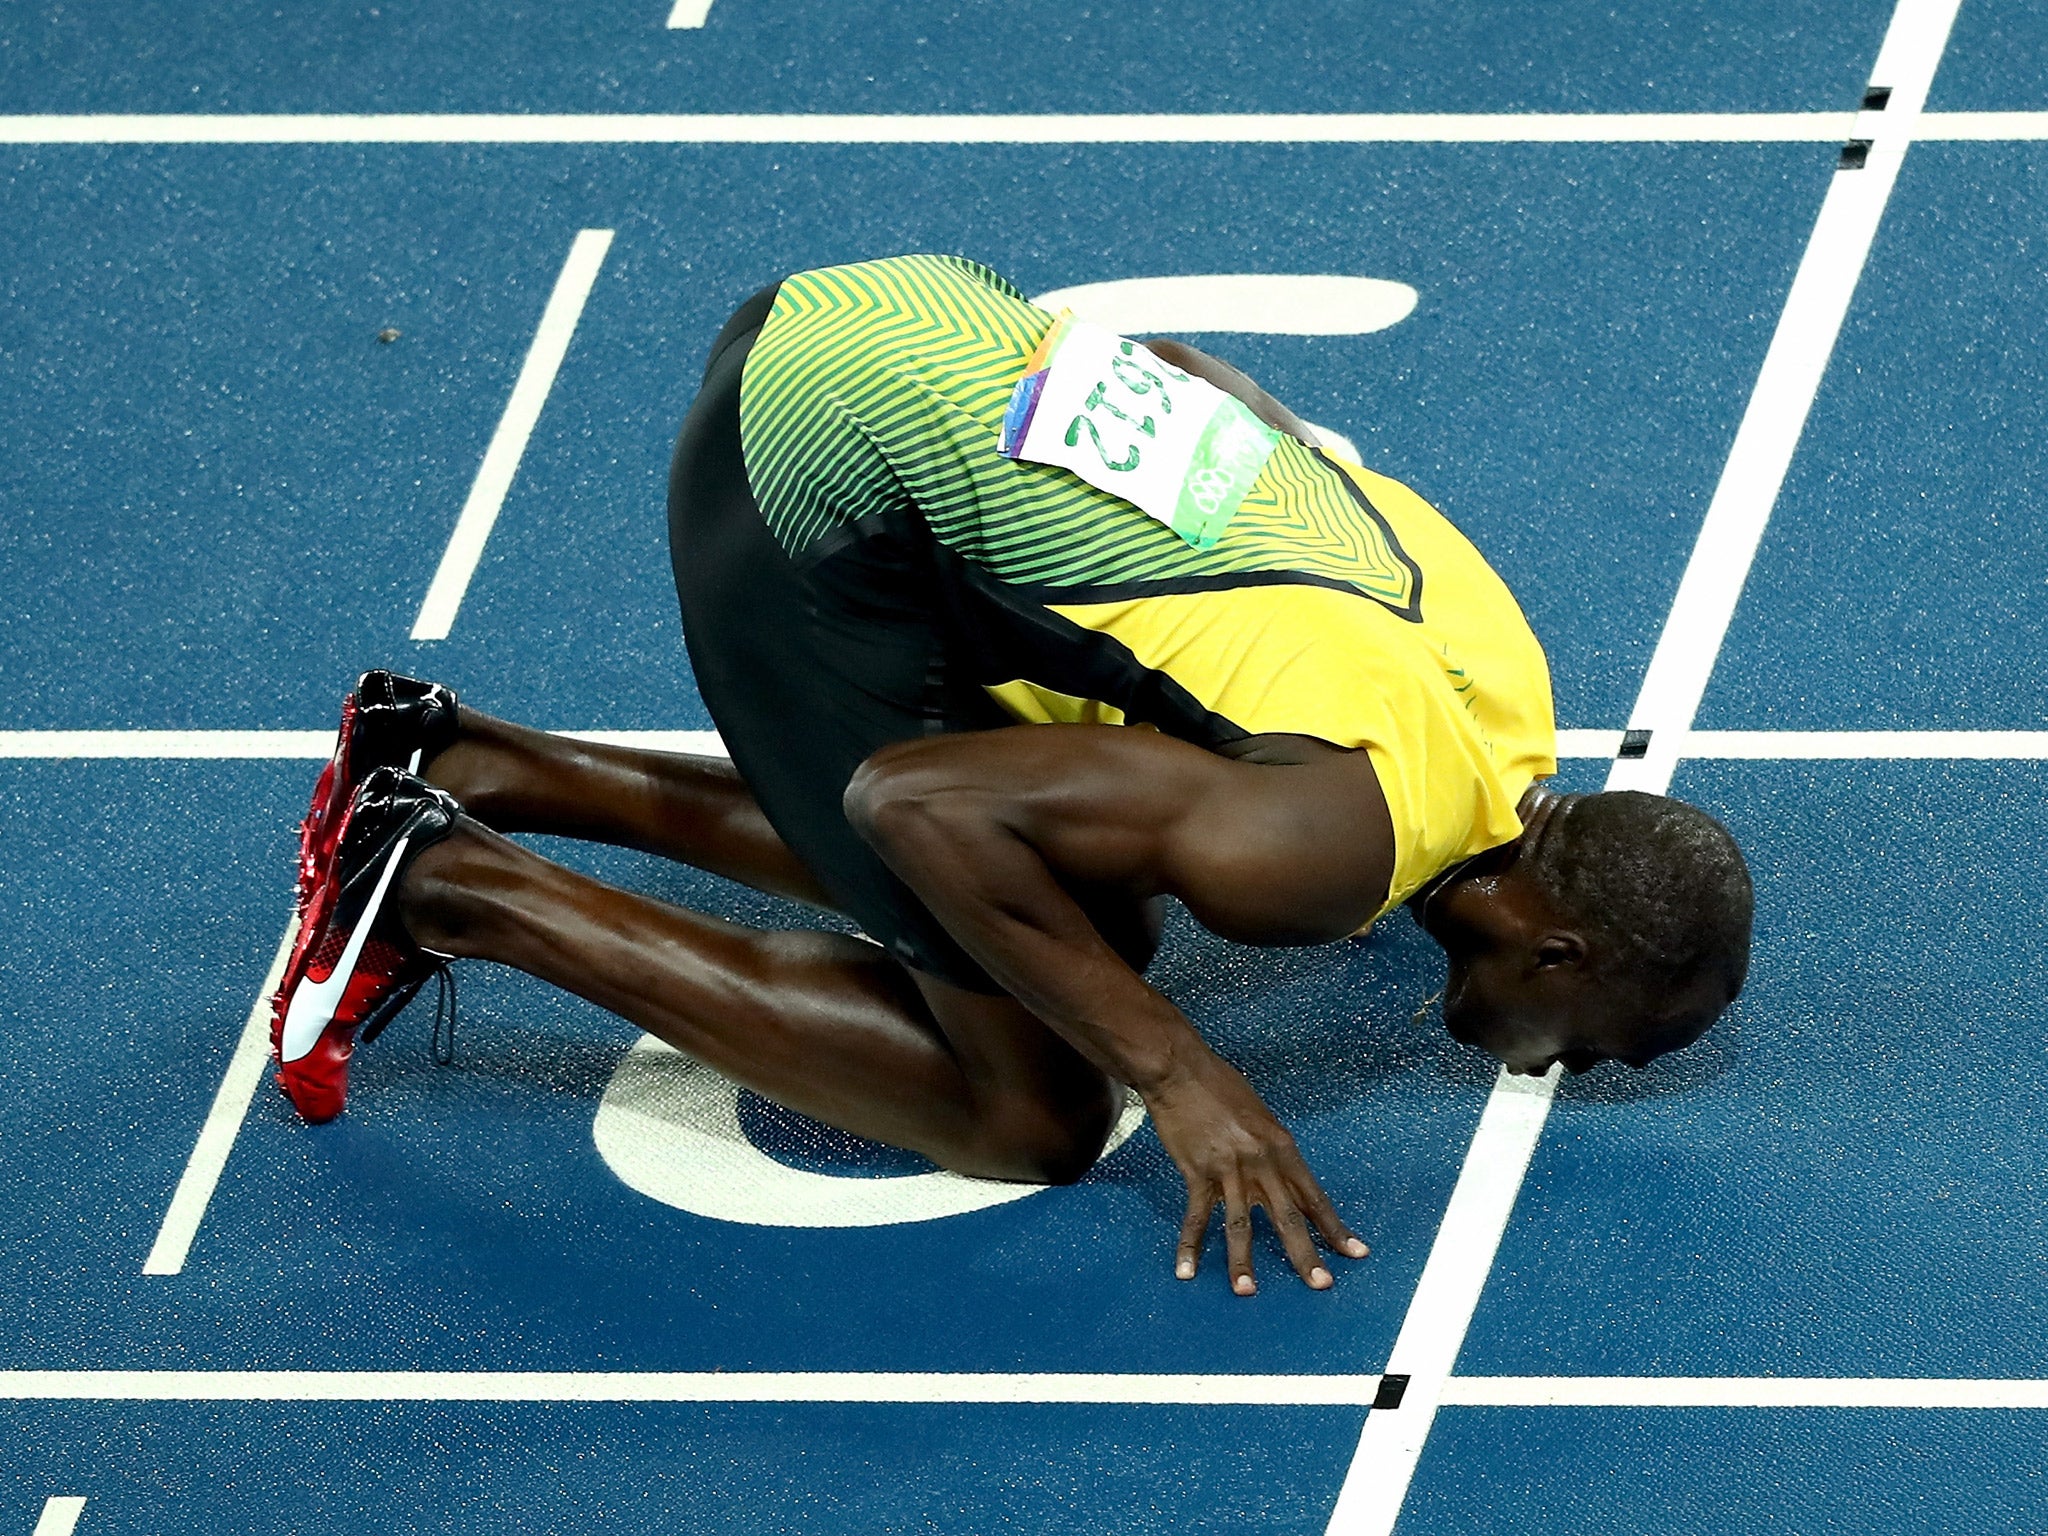 Usain Bolt kisses the finish line in his farewell to running the 200m at the Olympics